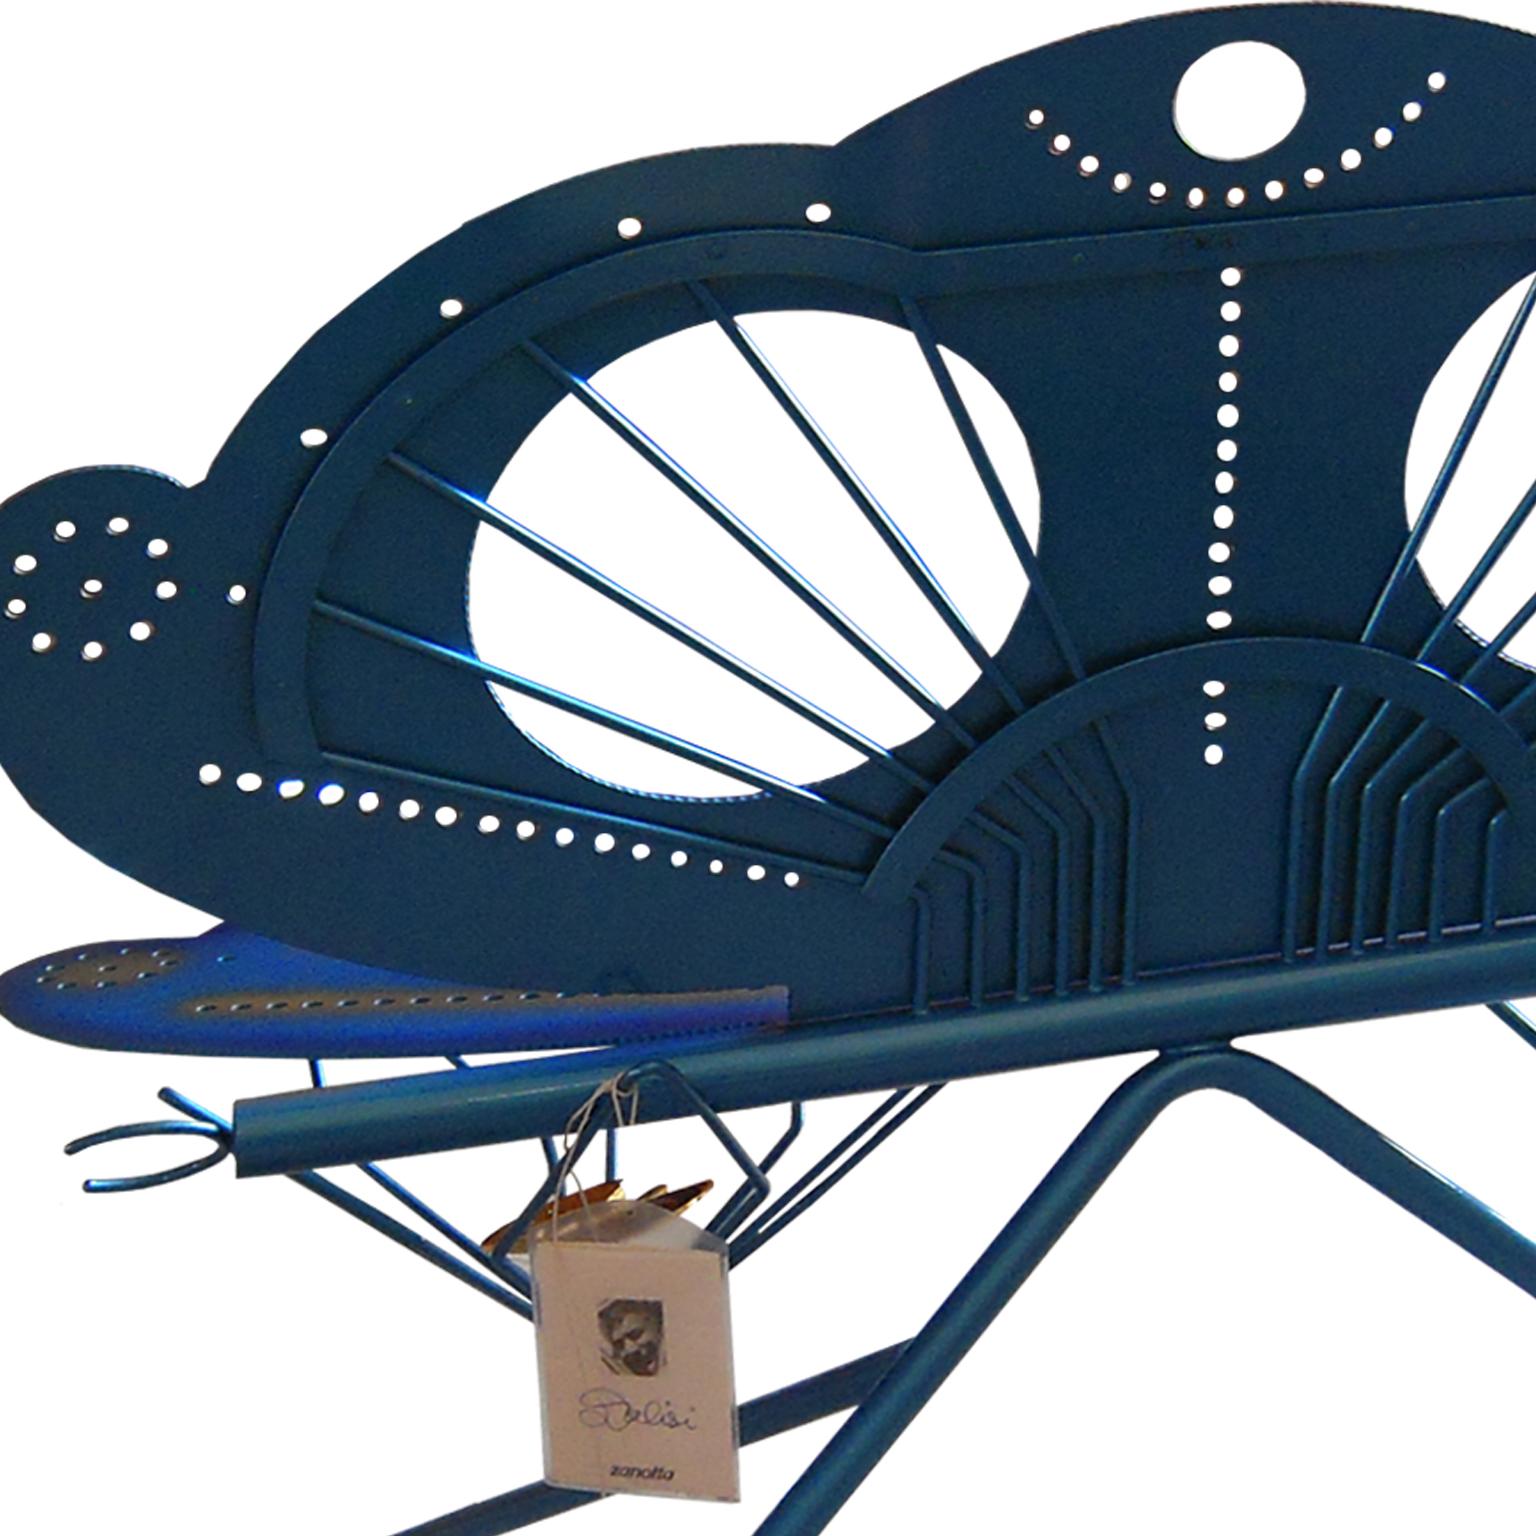 Italian Zanotta R. Dalisi Blue Painted Steel Bench, Limited Edition For Sale 6